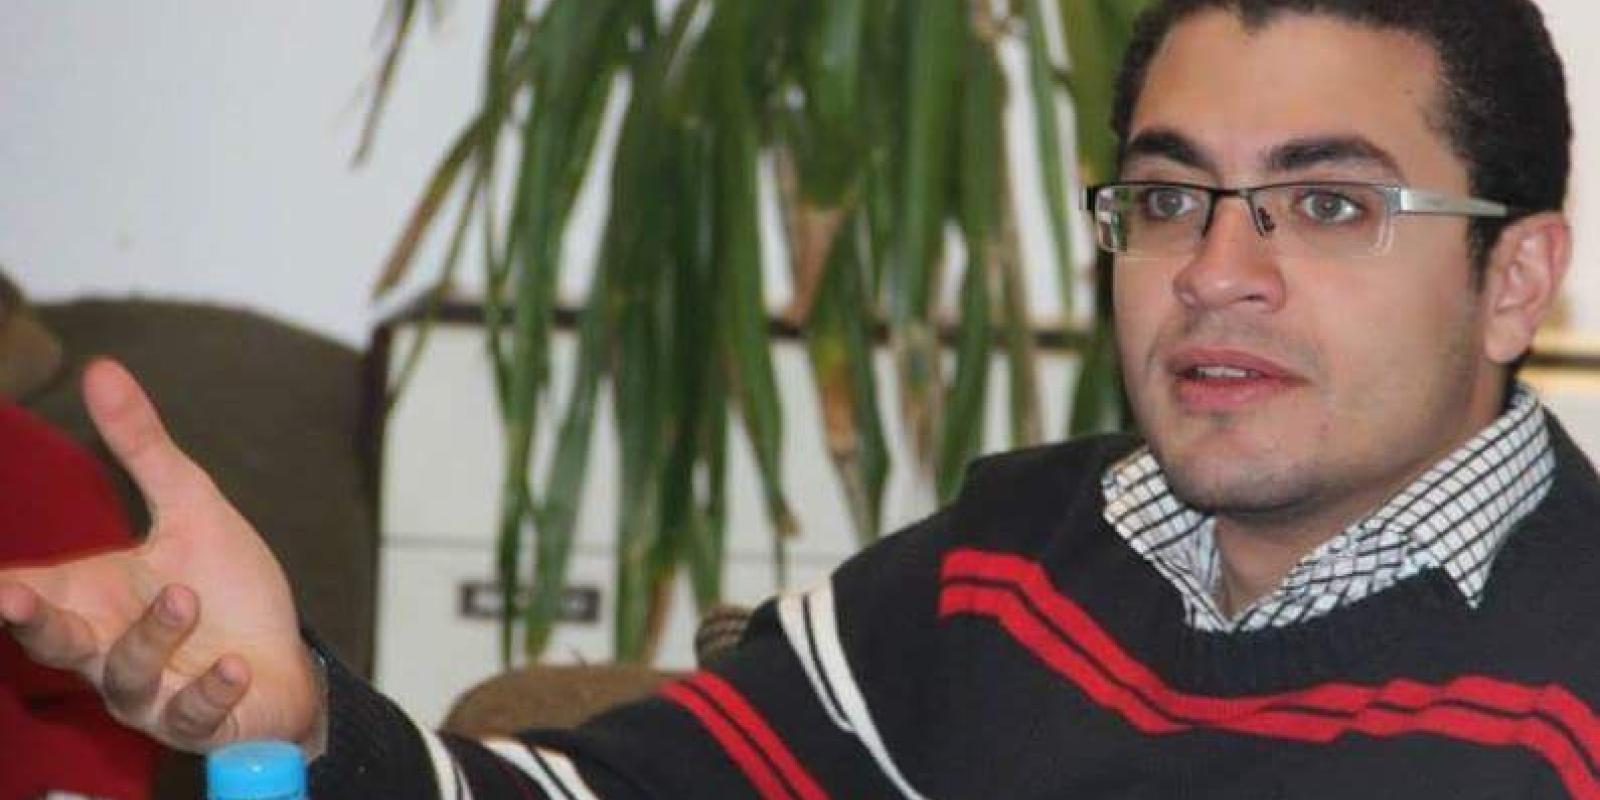 Marwan Kamel looks to support his fellow AUC students through peer mentorship